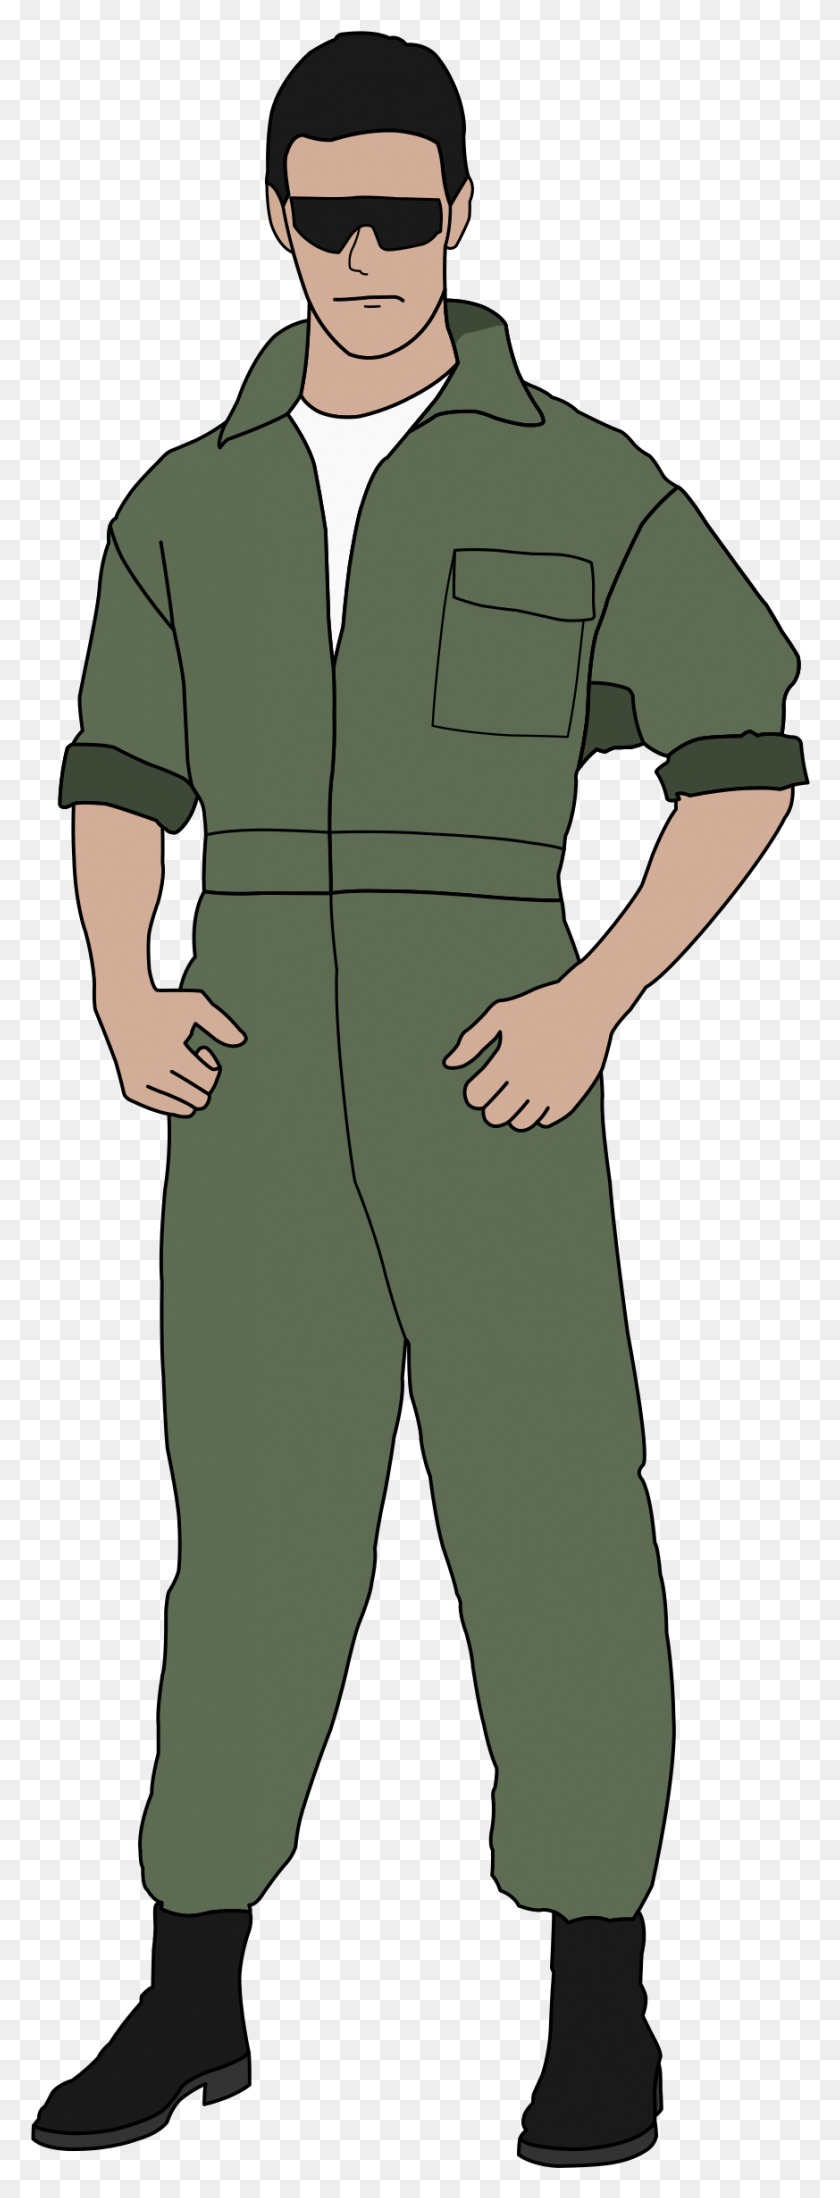 873x2393 This Free Icons Design Of Fighter Pilot, Pantalones, Ropa, Vestimenta Hd Png Descargar